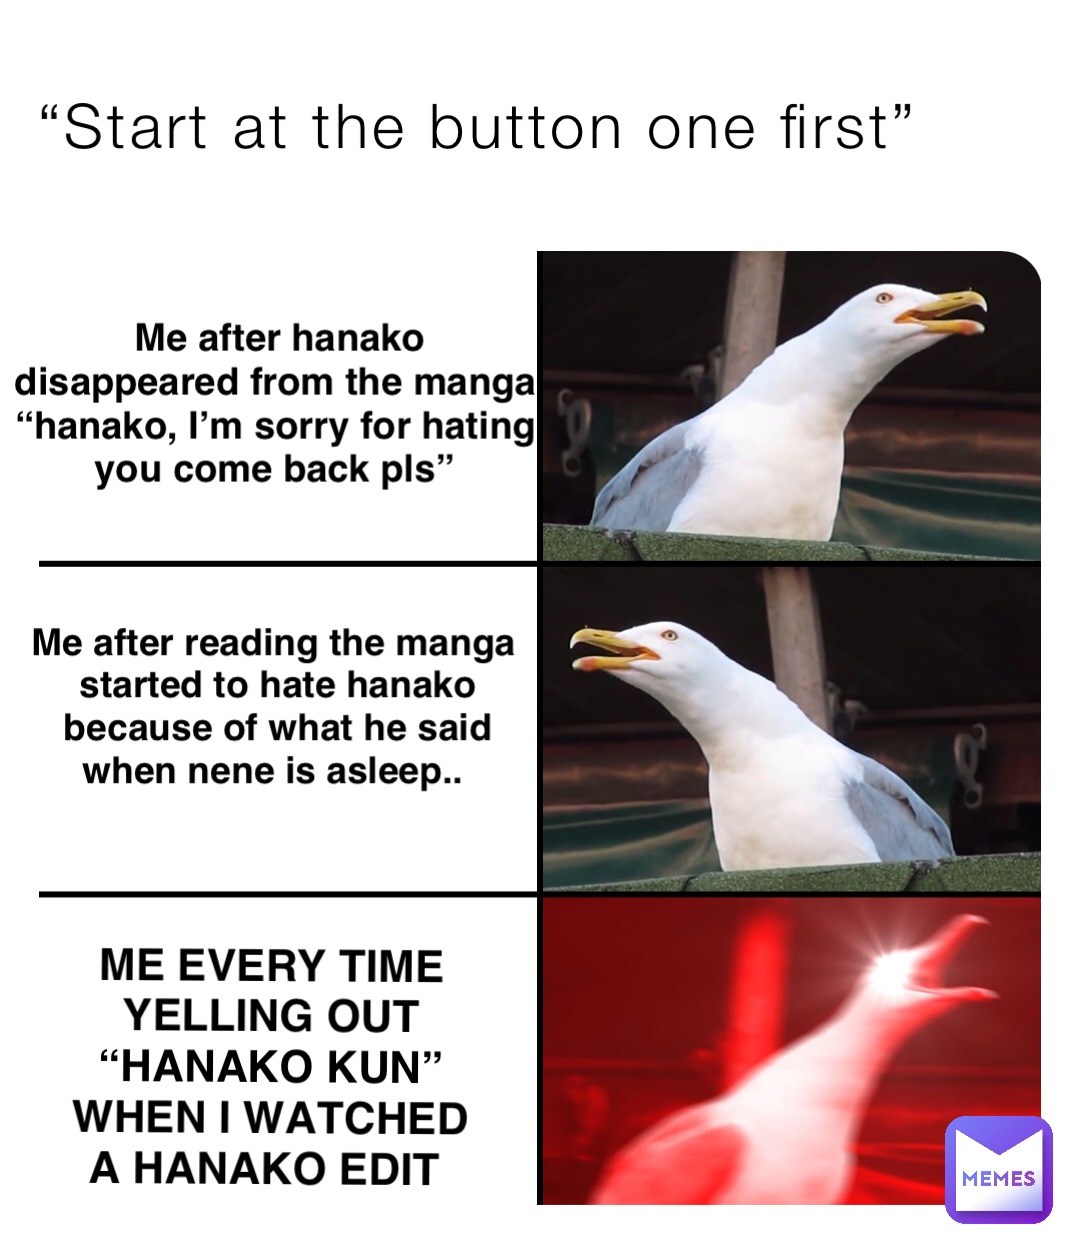 “Start at the button one first” ME EVERY TIME YELLING OUT “HANAKO KUN” WHEN I WATCHED A HANAKO EDIT Me after reading the manga started to hate hanako because of what he said when nene is asleep.. Me after hanako disappeared from the manga “hanako, I’m sorry for hating you come back pls”